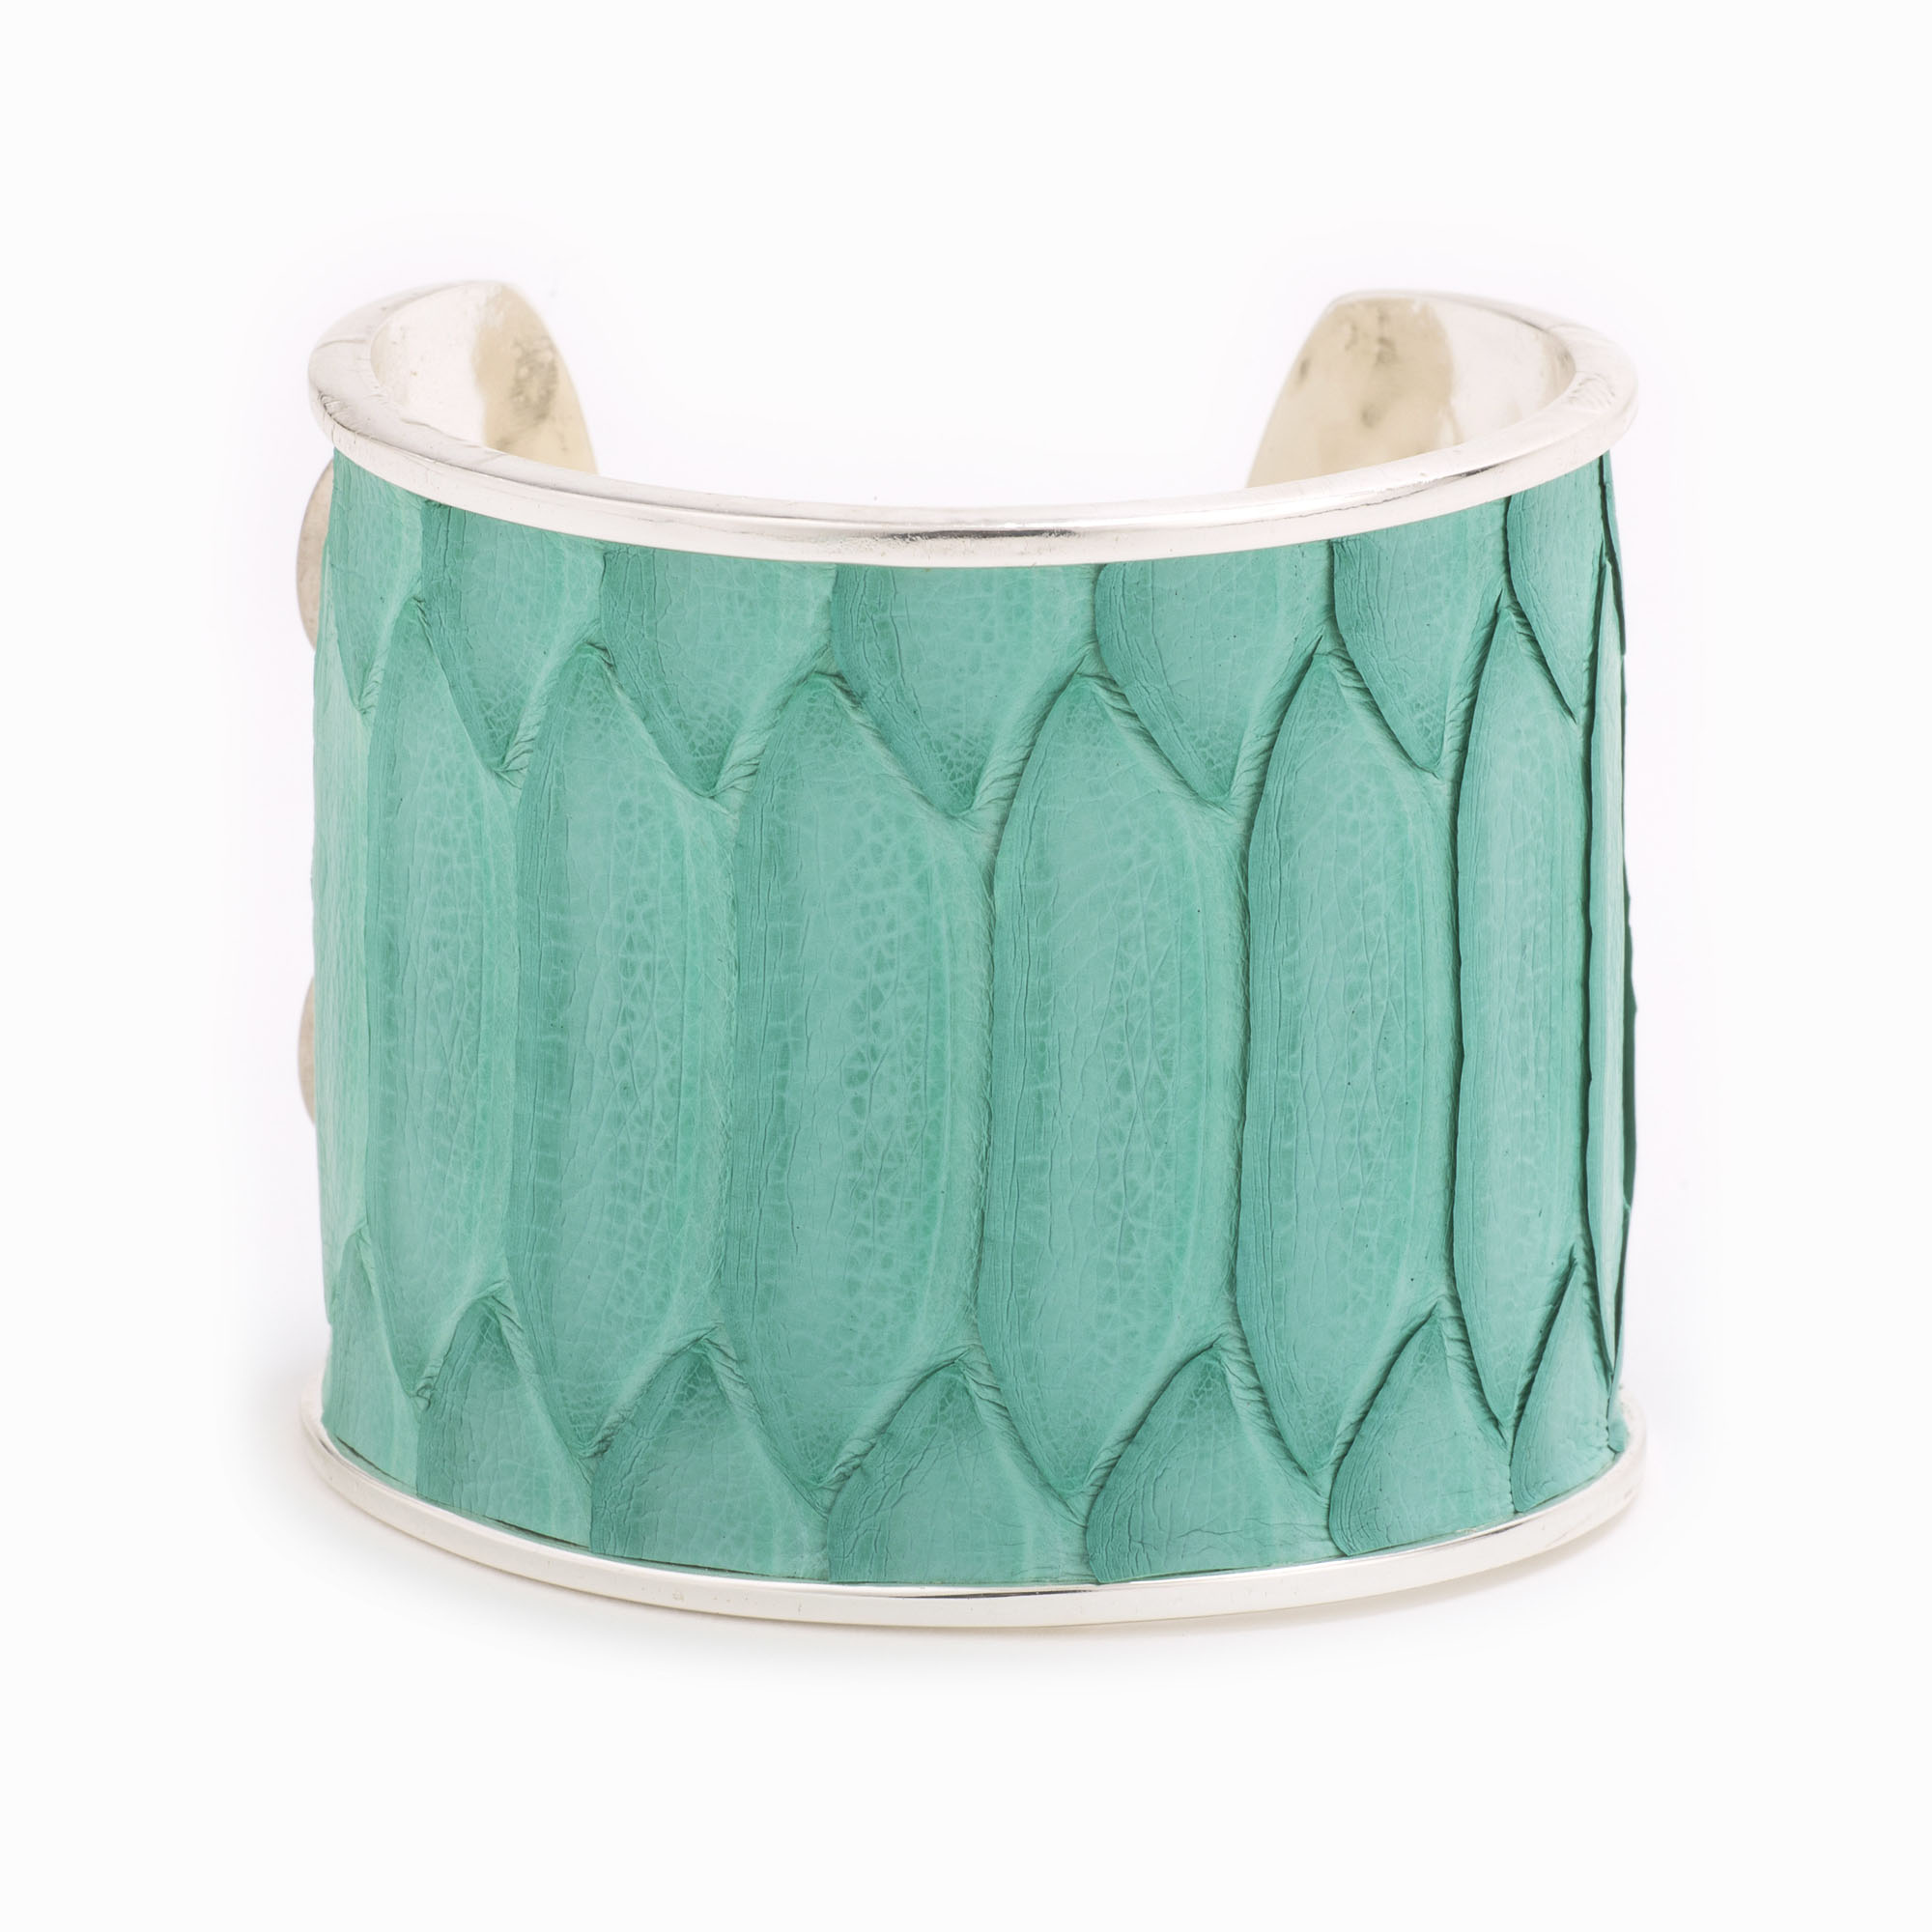 A large silver cuff with turquoise colored snakeskin pattern inlaid.